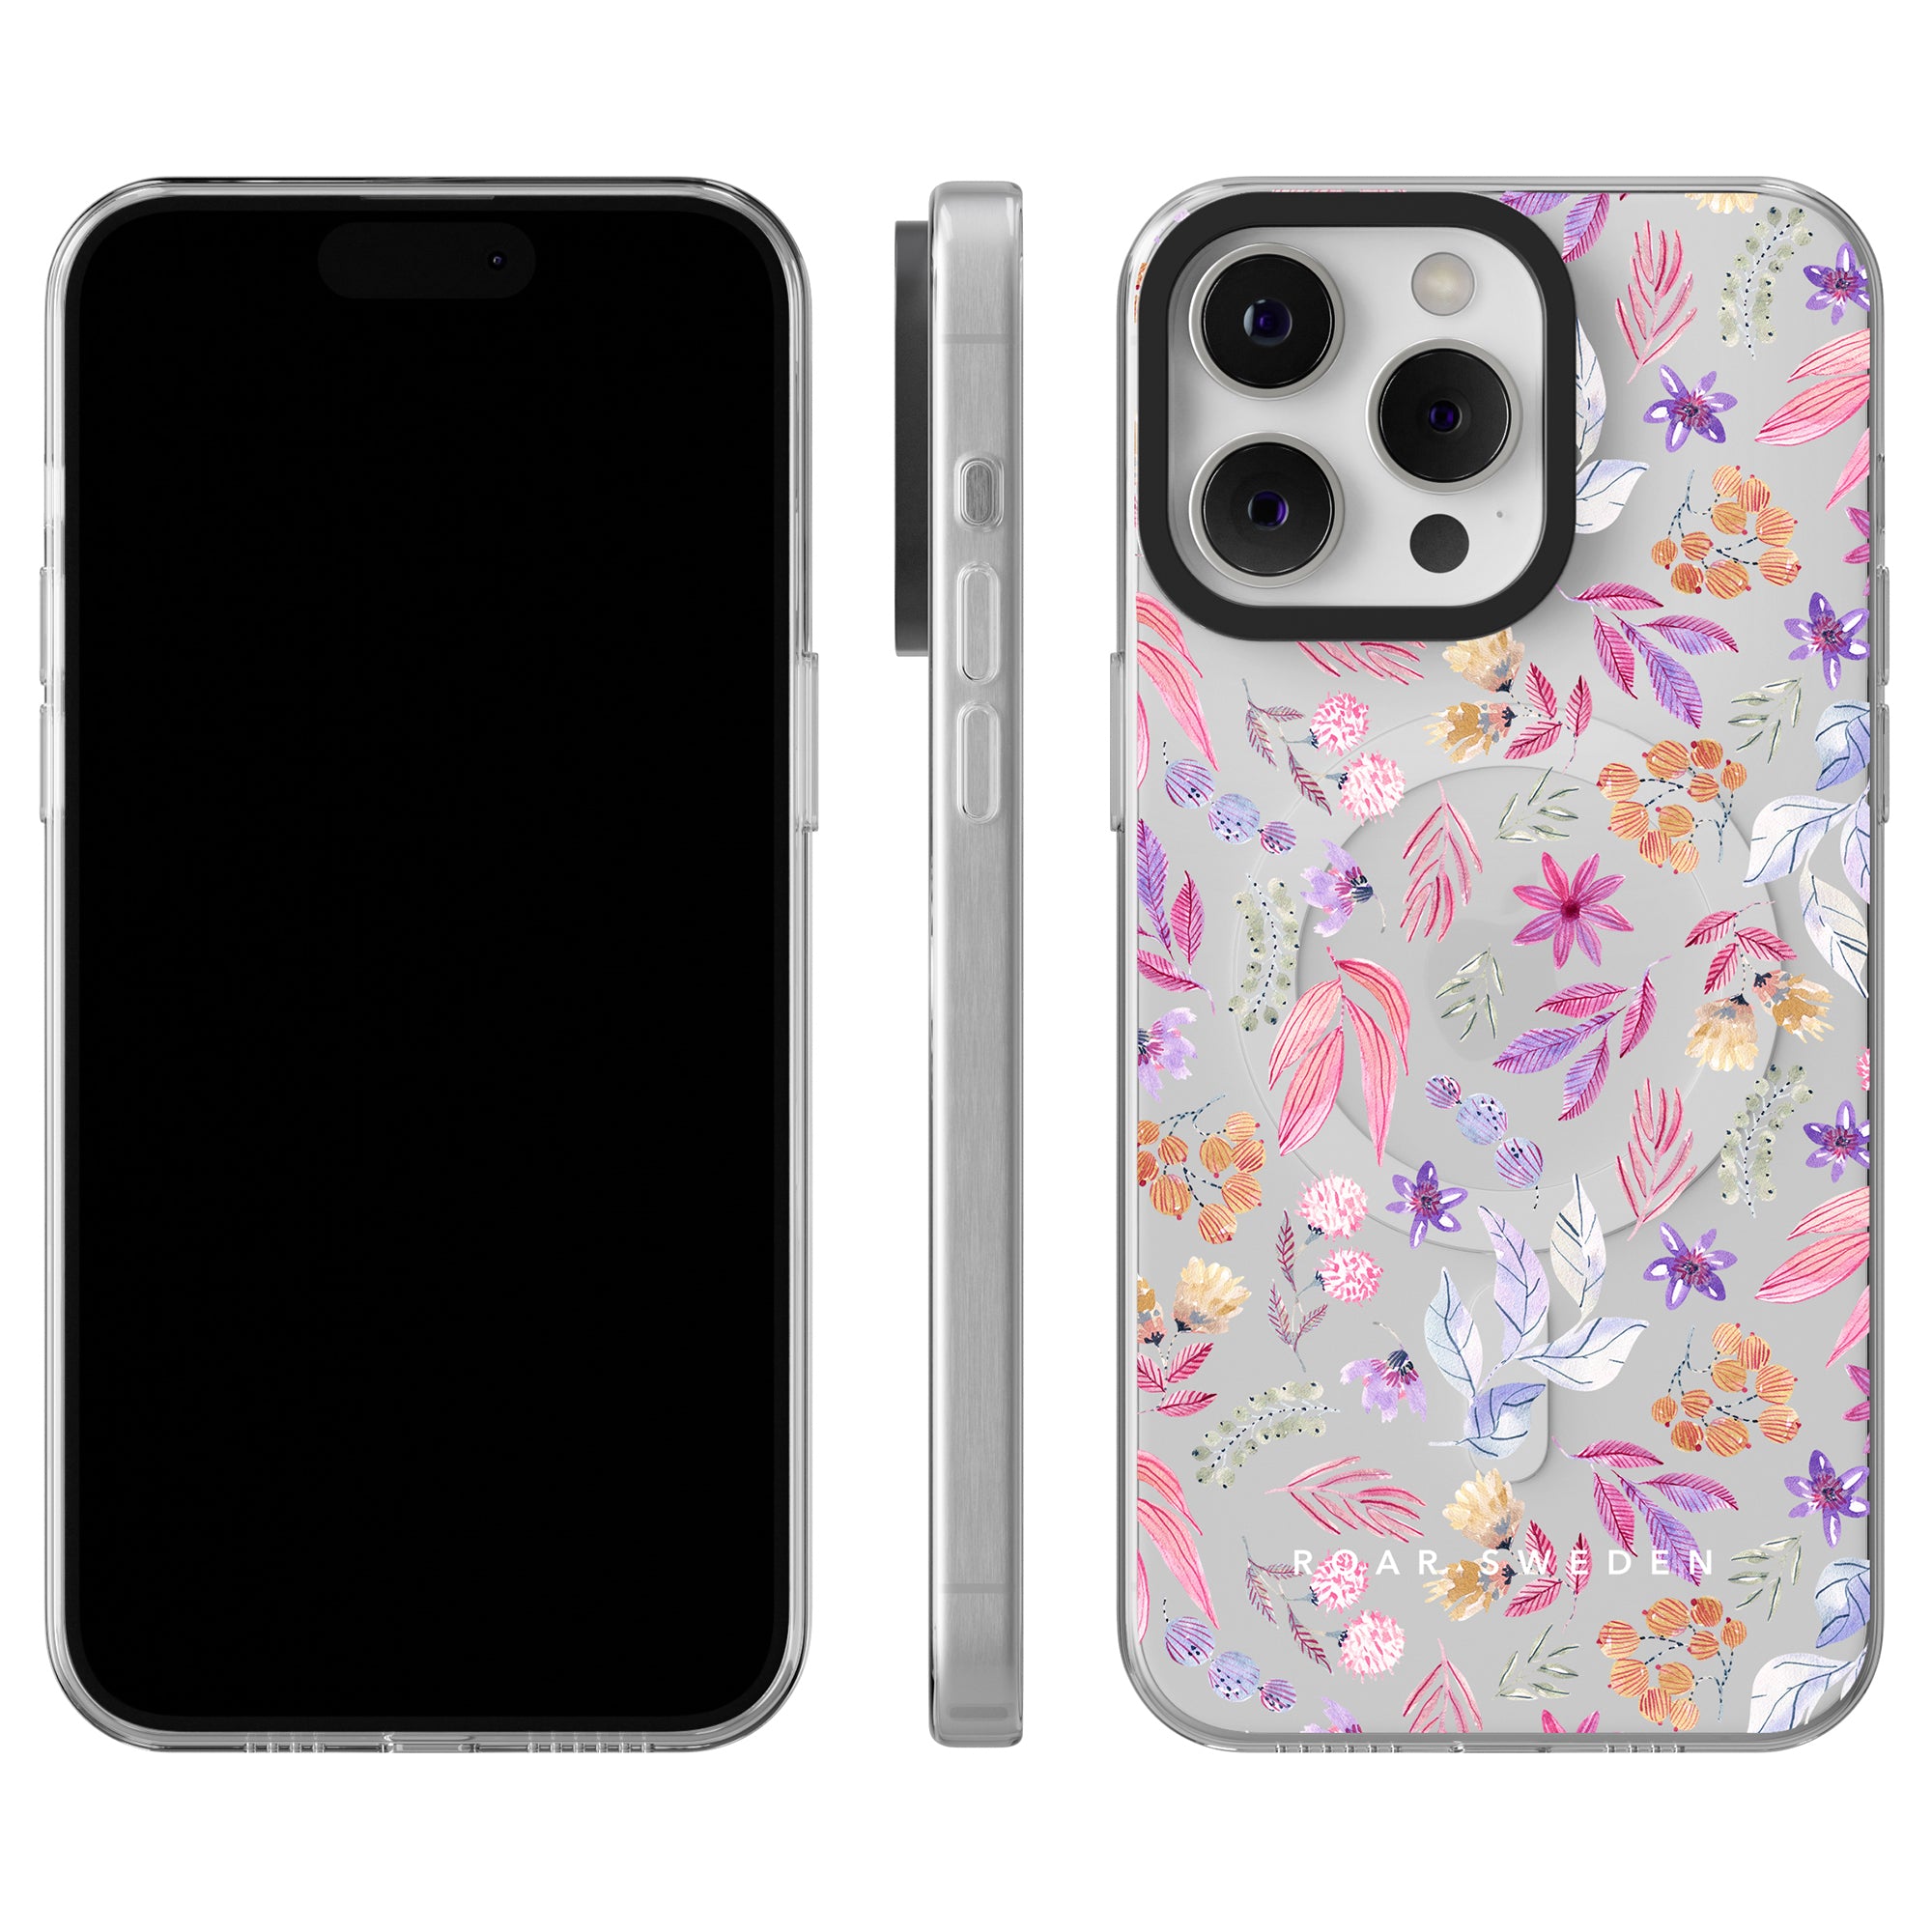 Two smartphones: one with a blank screen, and the other showcasing the vibrant Flower Power - MagSafe from our Floral Collection.